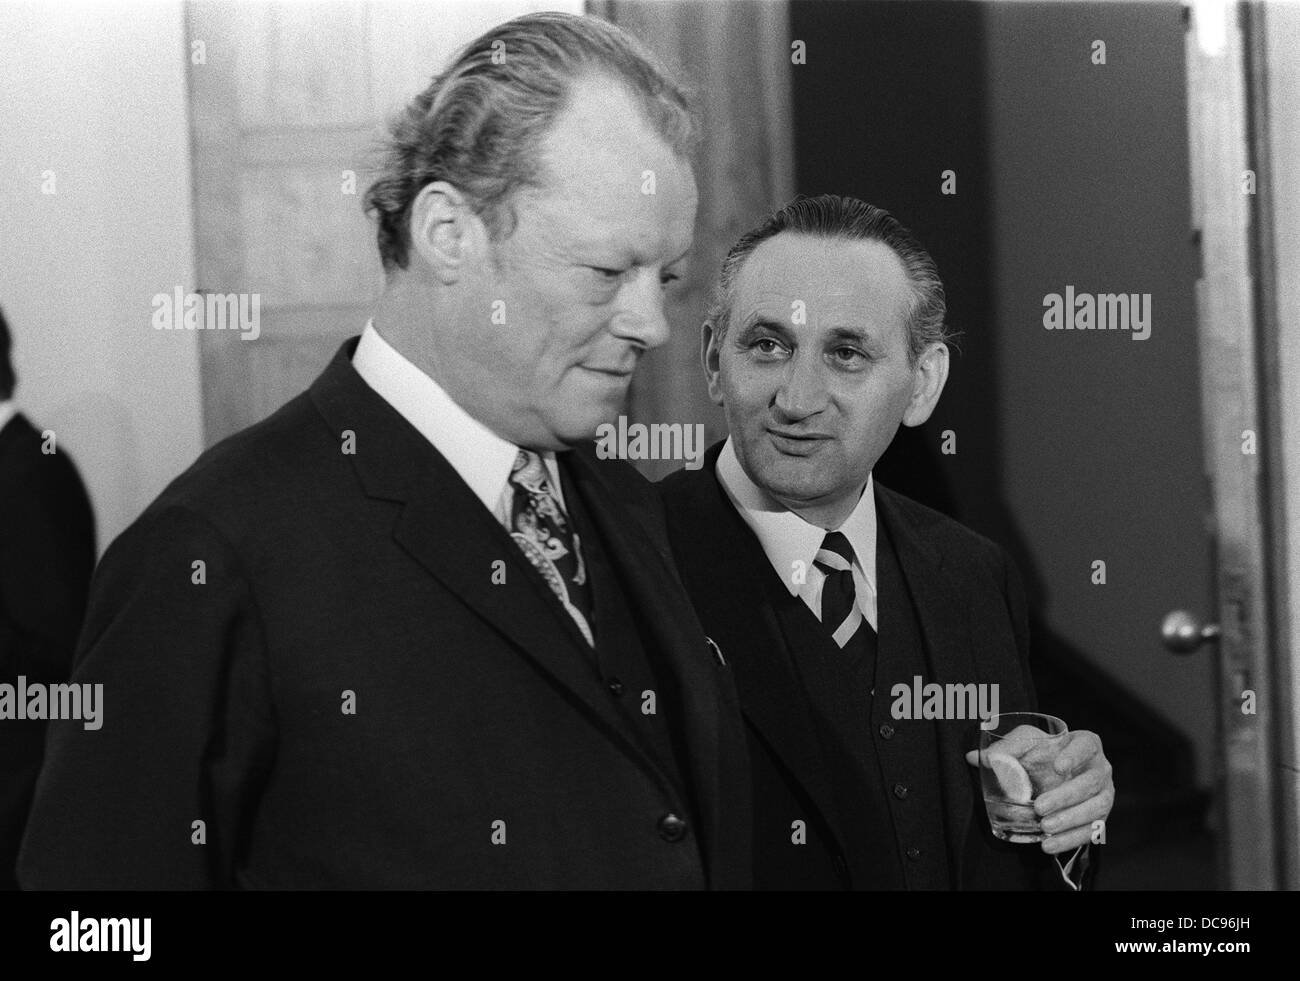 Chancellor Willy Brandt (l, SPD) talks to Egon Bahr (r, SPD) on the 3rd of June in 1972. Stock Photo